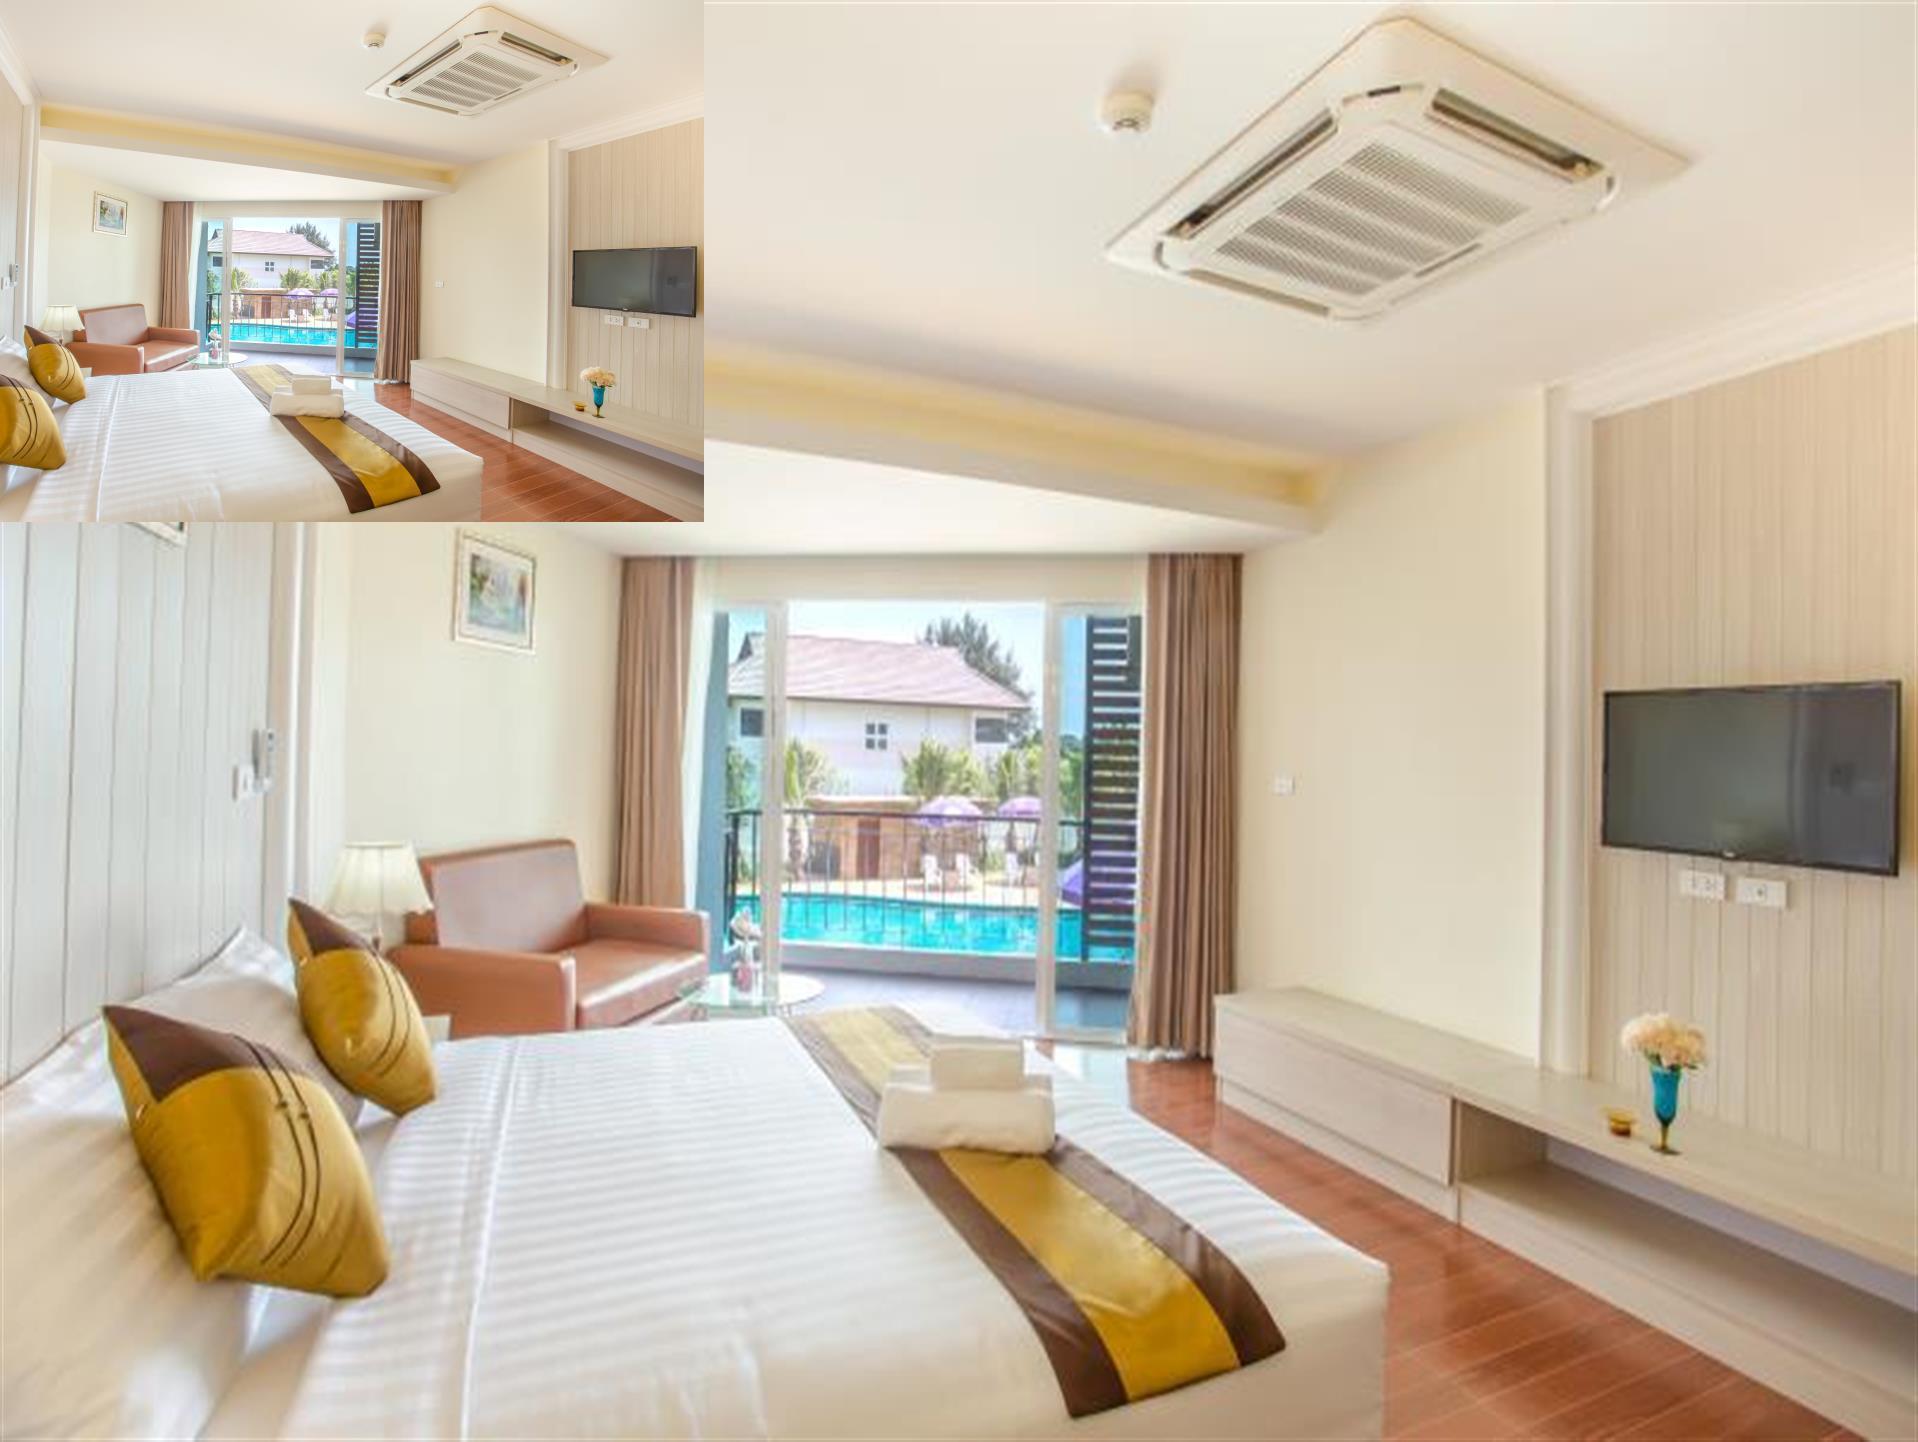 Saint Tropez Beach Resort Hotel Thailand FAQ 2016, What facilities are there in Saint Tropez Beach Resort Hotel Thailand 2016, What Languages Spoken are Supported in Saint Tropez Beach Resort Hotel Thailand 2016, Which payment cards are accepted in Saint Tropez Beach Resort Hotel Thailand , Thailand Saint Tropez Beach Resort Hotel room facilities and services Q&A 2016, Thailand Saint Tropez Beach Resort Hotel online booking services 2016, Thailand Saint Tropez Beach Resort Hotel address 2016, Thailand Saint Tropez Beach Resort Hotel telephone number 2016,Thailand Saint Tropez Beach Resort Hotel map 2016, Thailand Saint Tropez Beach Resort Hotel traffic guide 2016, how to go Thailand Saint Tropez Beach Resort Hotel, Thailand Saint Tropez Beach Resort Hotel booking online 2016, Thailand Saint Tropez Beach Resort Hotel room types 2016.